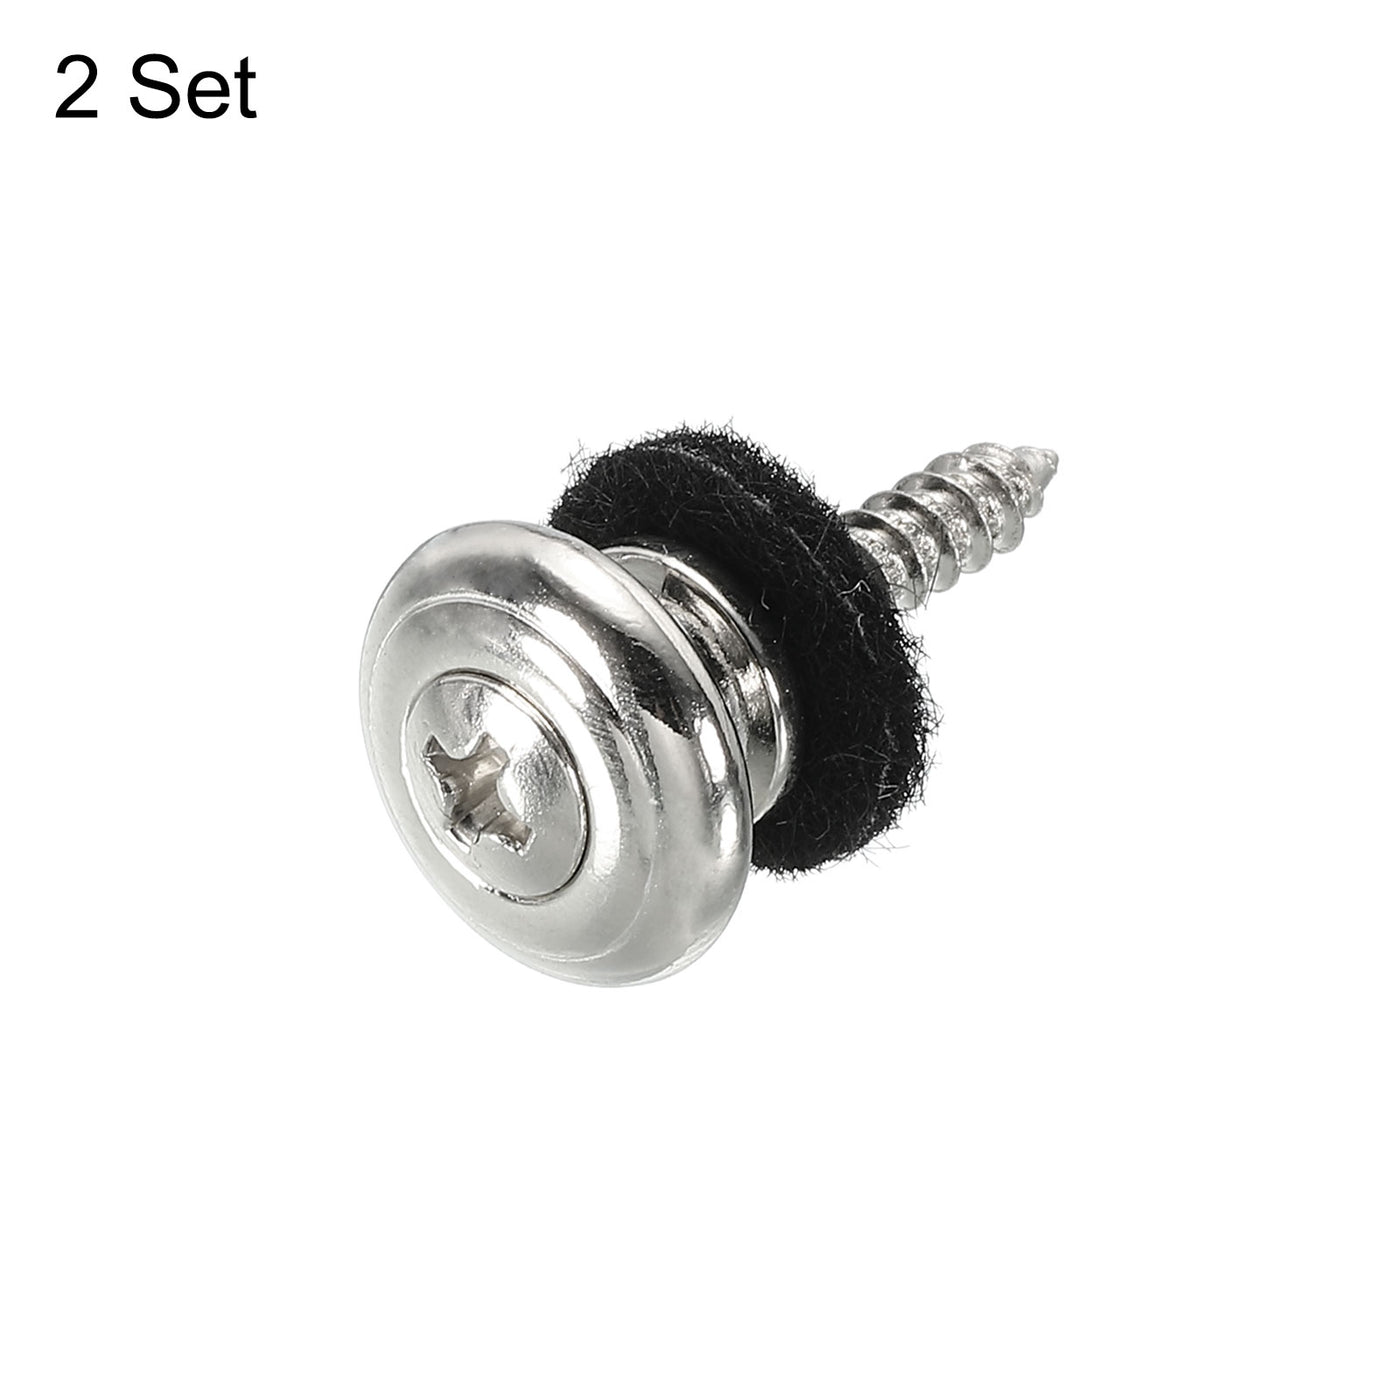 Harfington Guitar Strap Button Buckle Lock Metal Small End Pins Sets with Felt Washer for Guitar Bass